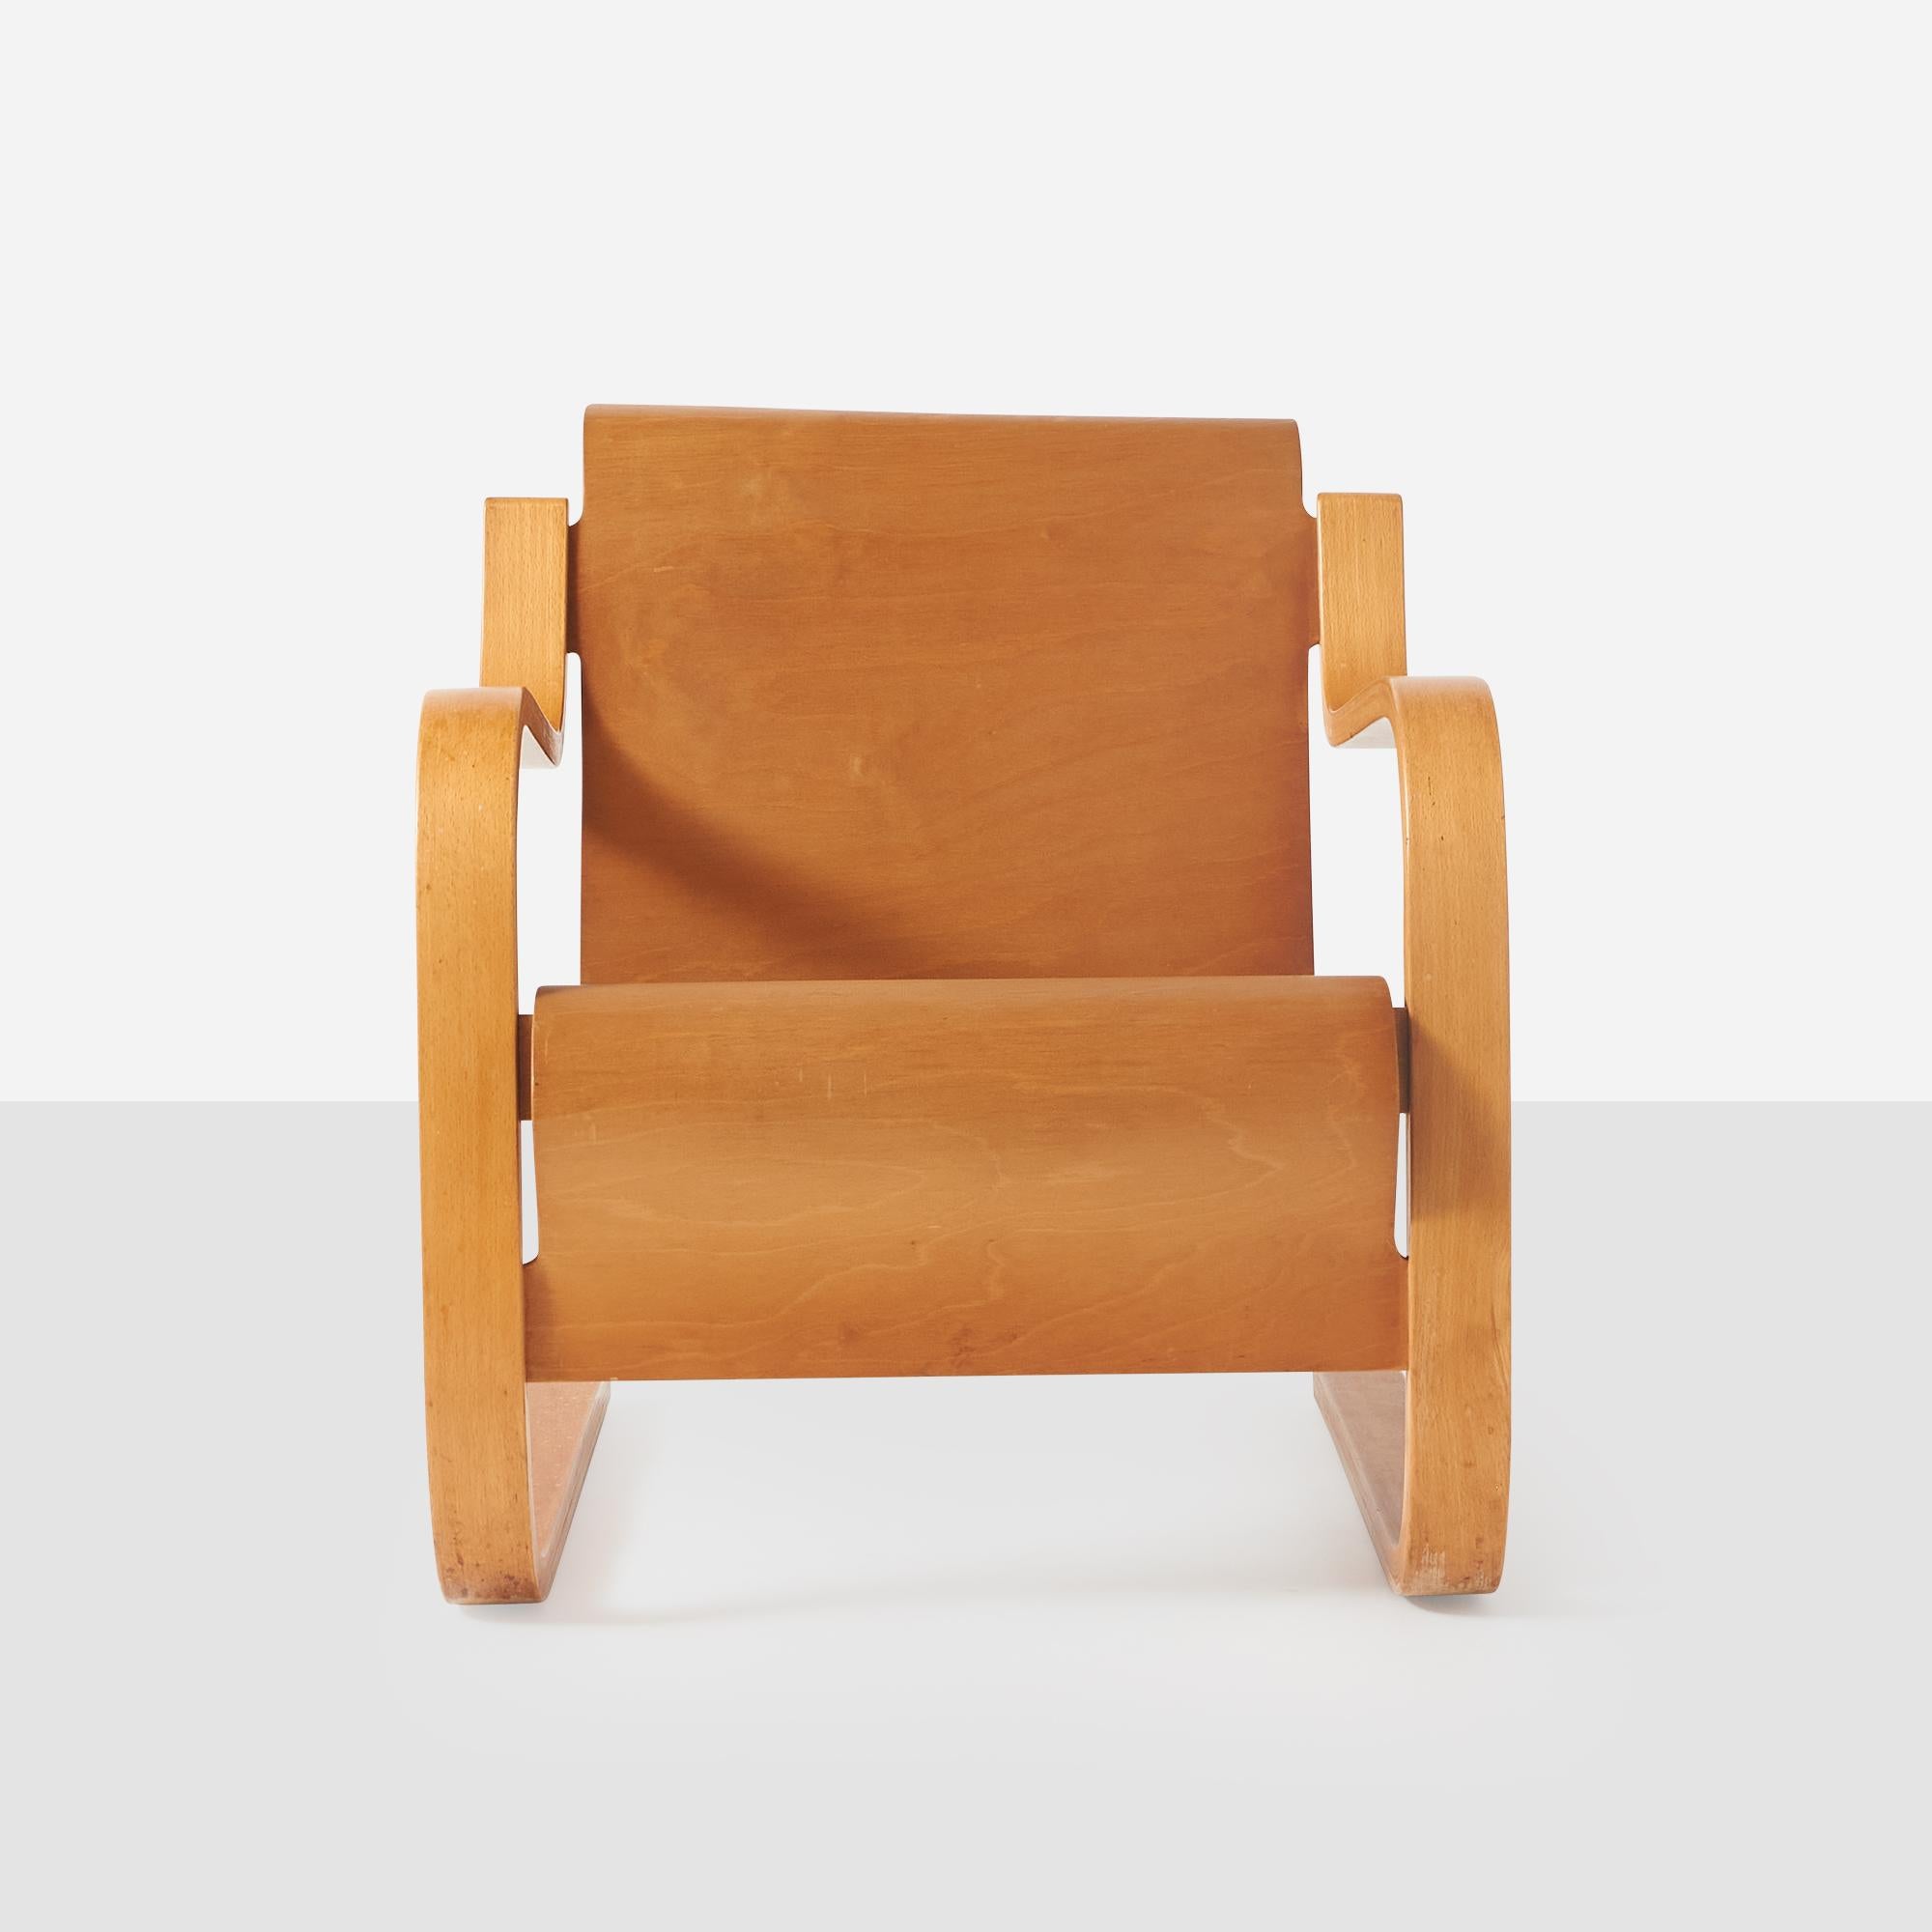 Alvar Aalto Cantilever Chair, Model 31 In Good Condition For Sale In San Francisco, CA